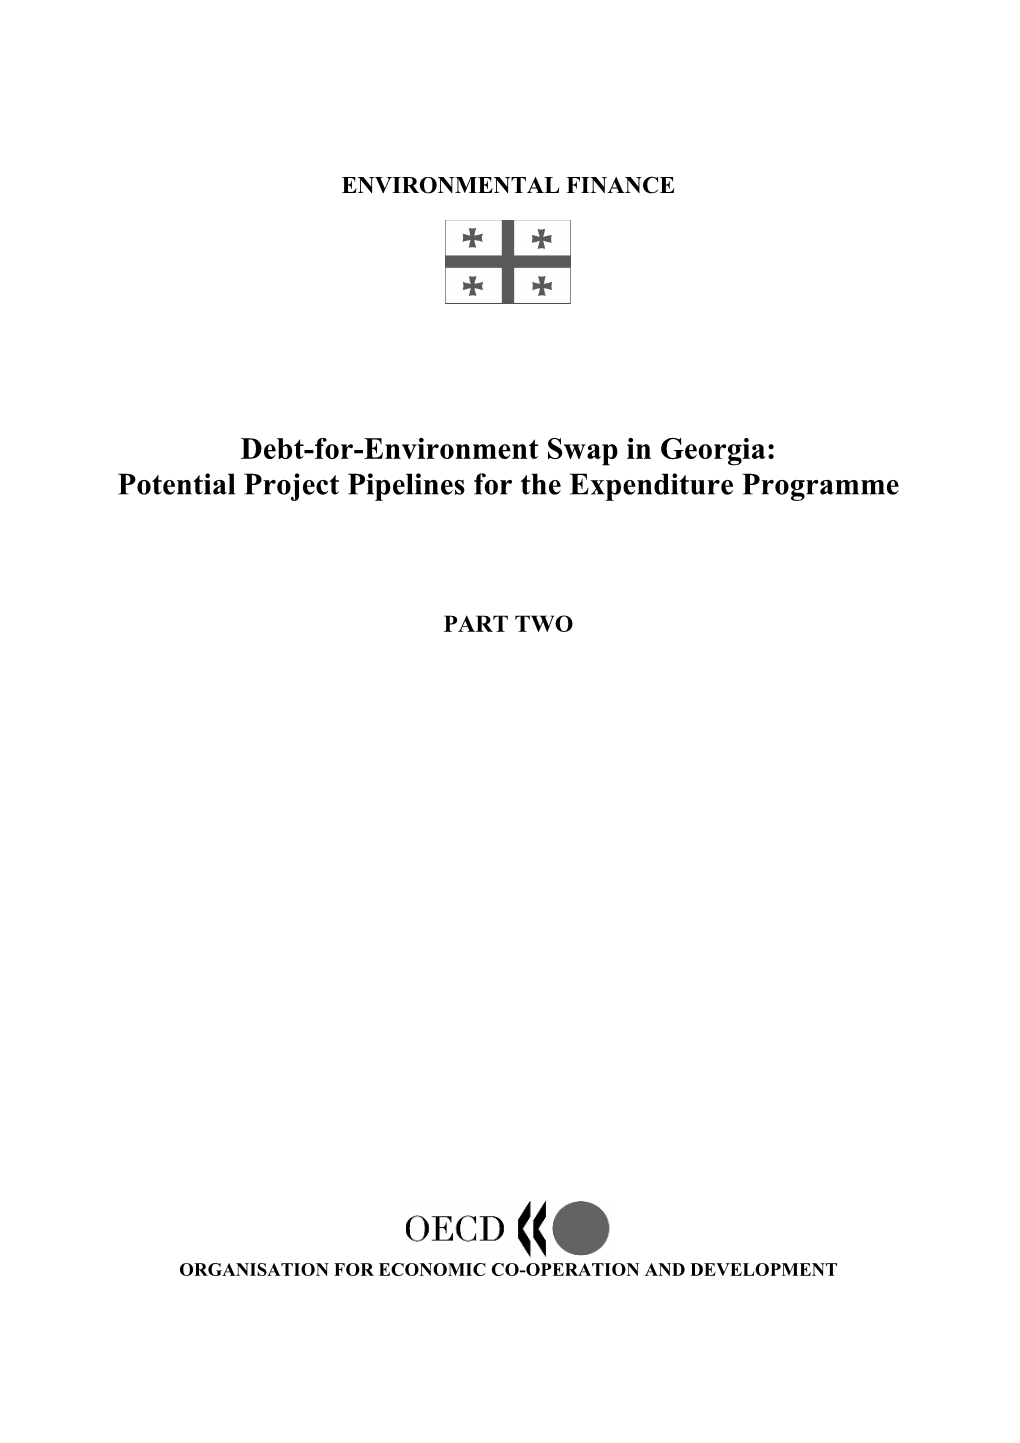 Debt-For-Environment Swap in Georgia: Potential Project Pipelines for the Expenditure Programme